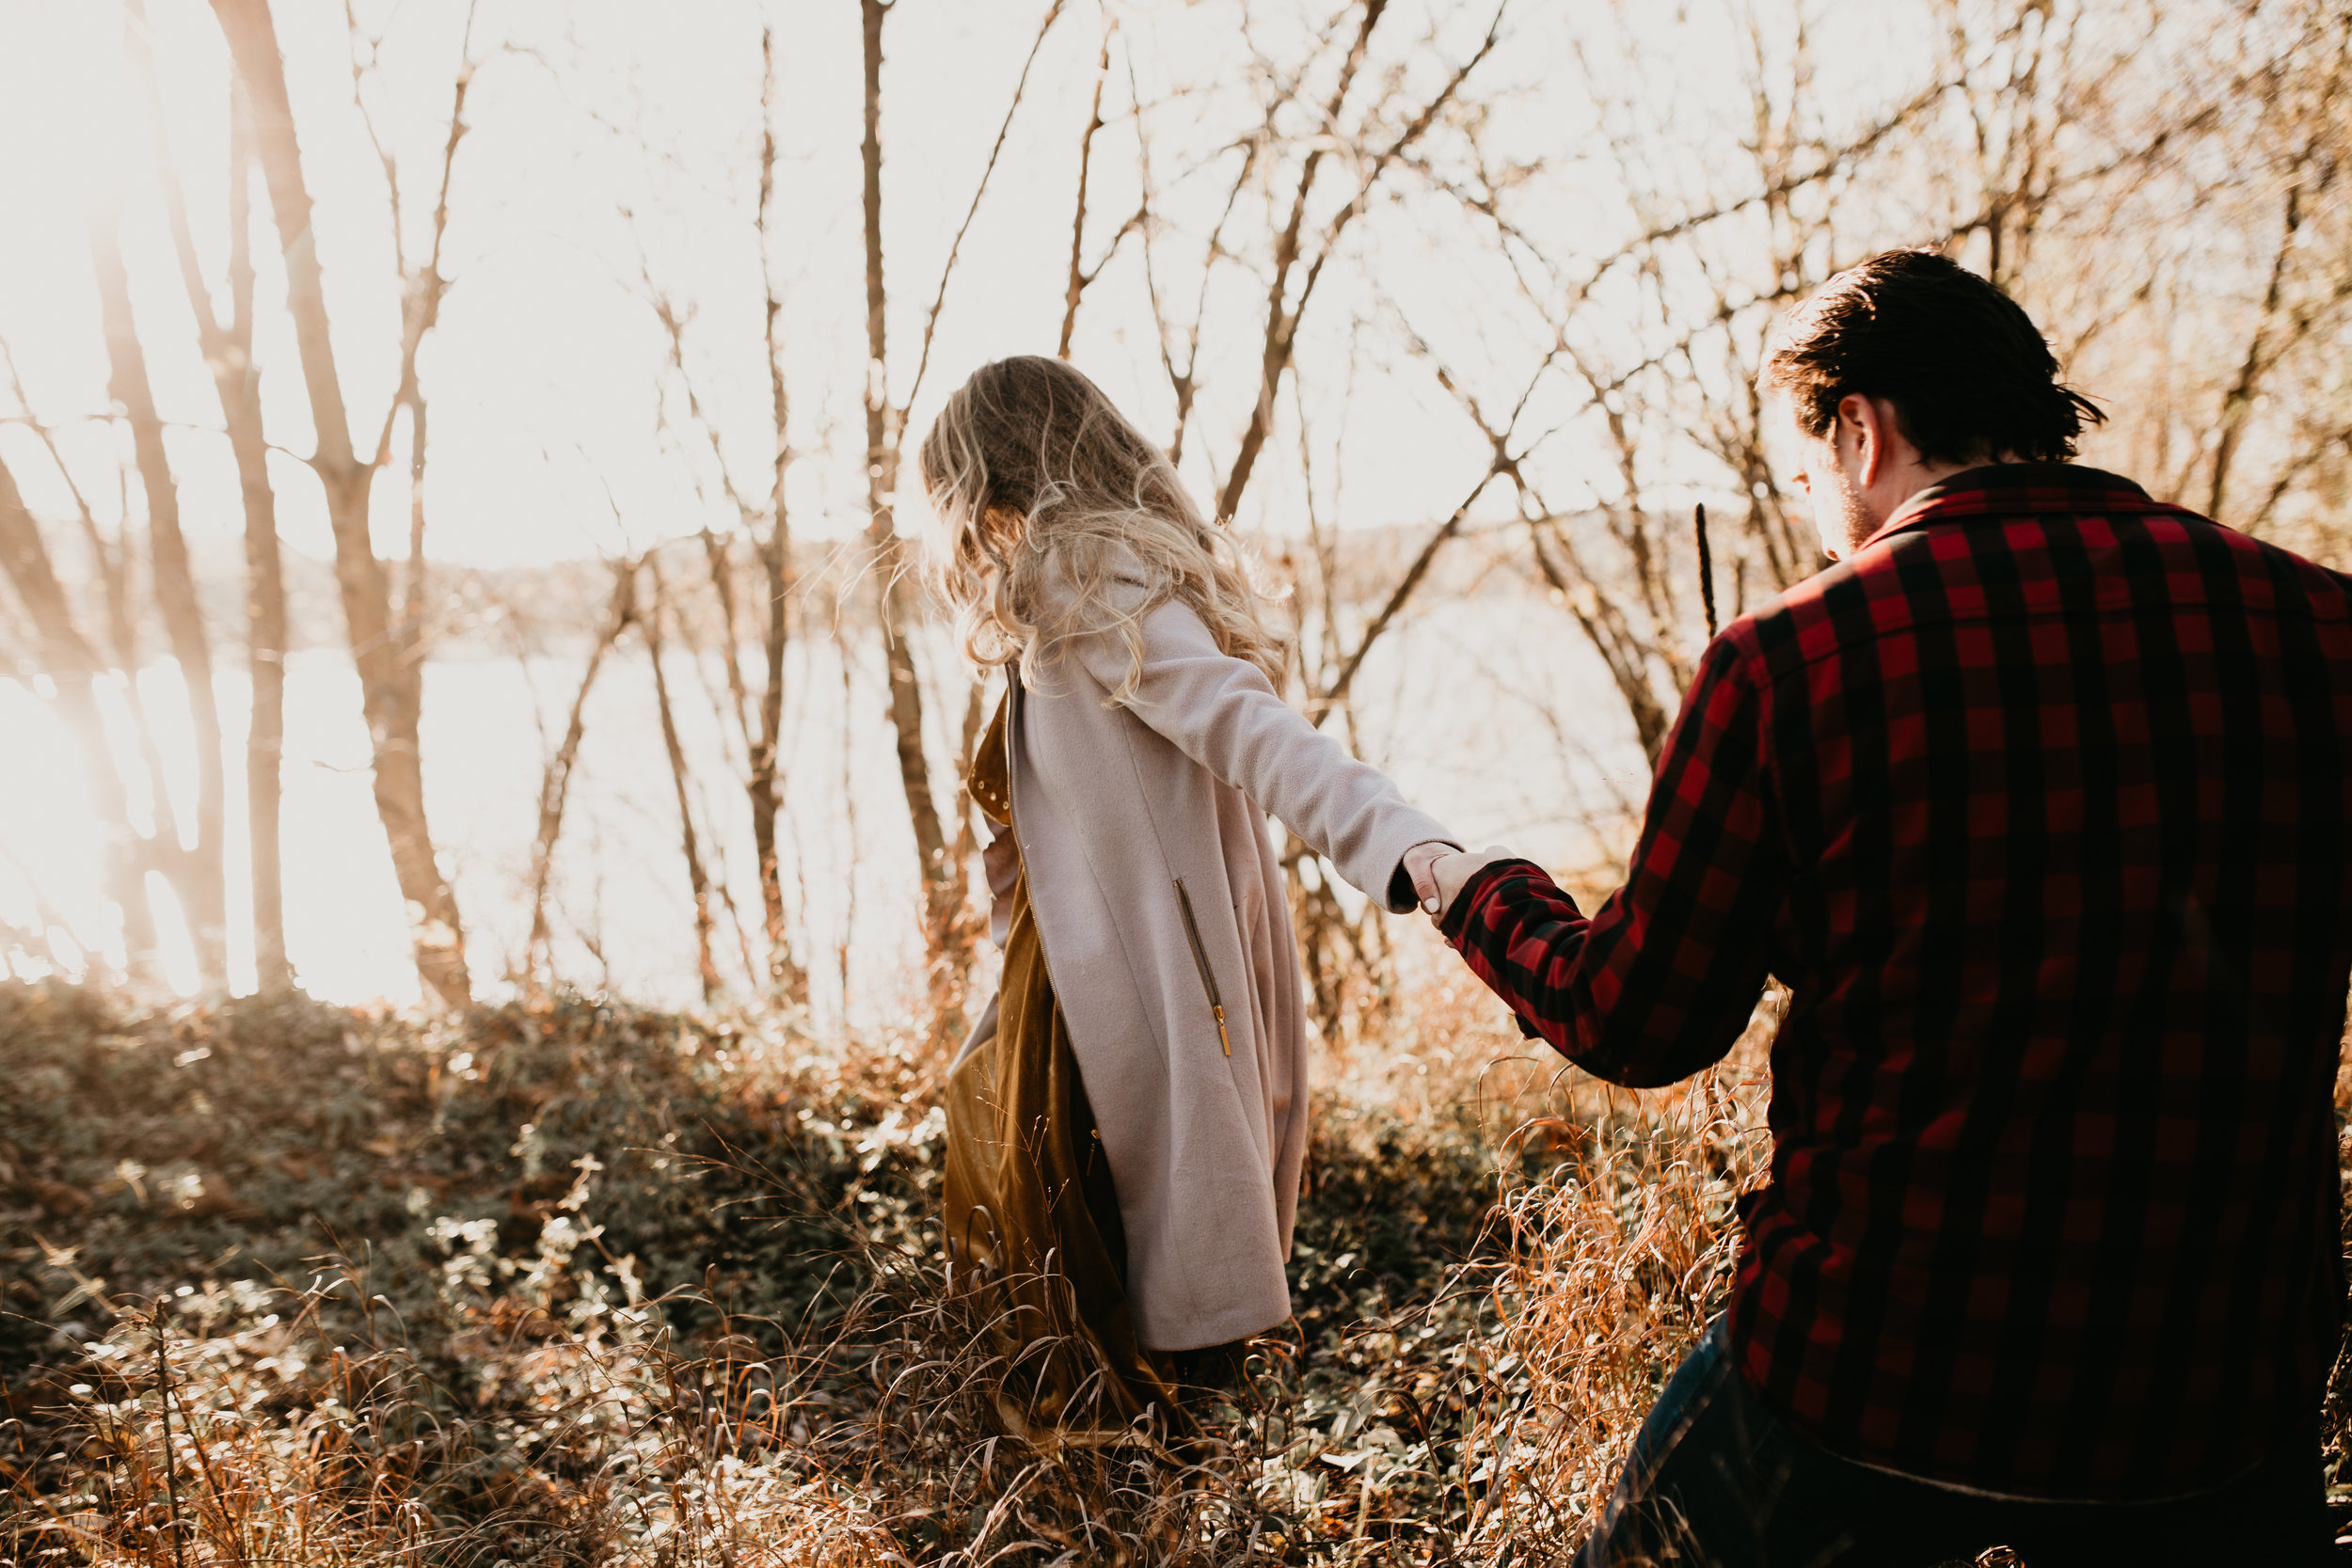 nicole-daacke-photography-white-cliffs-of-conoy-in-lancaster-pa-pennsylvania-adventure-session-adventure-elopement-photographer-engagement session-in-lancaster-pa-photographer-golden-sunset-winter-solstice-wedding-riverside-elopement-4012.jpg